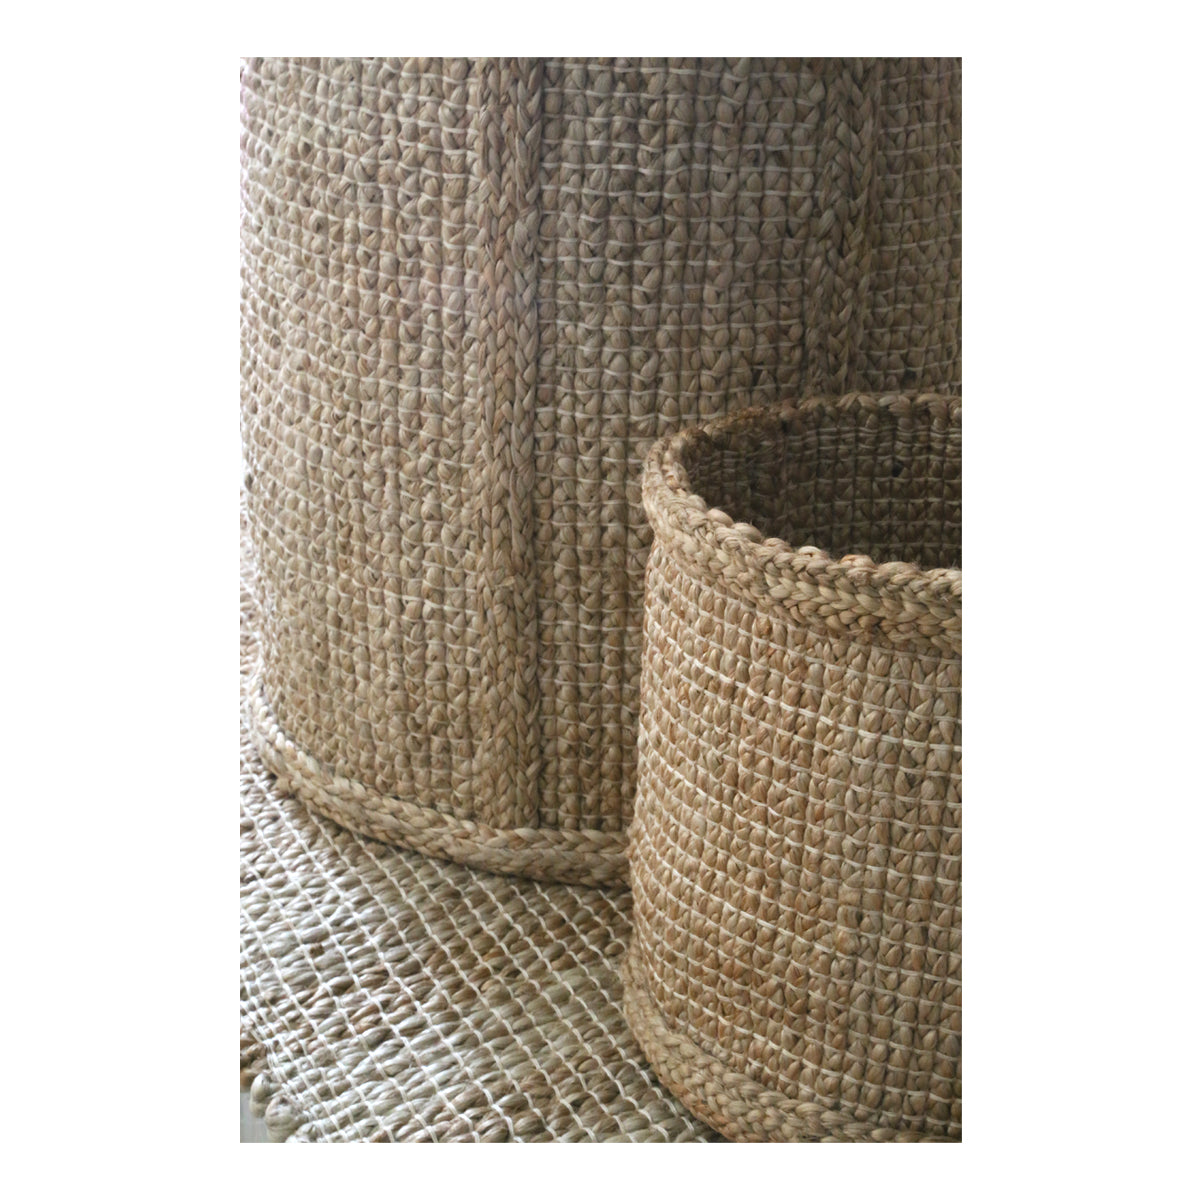 Tall Narrow Jute Basket with Handles, Natural Hatched Weave